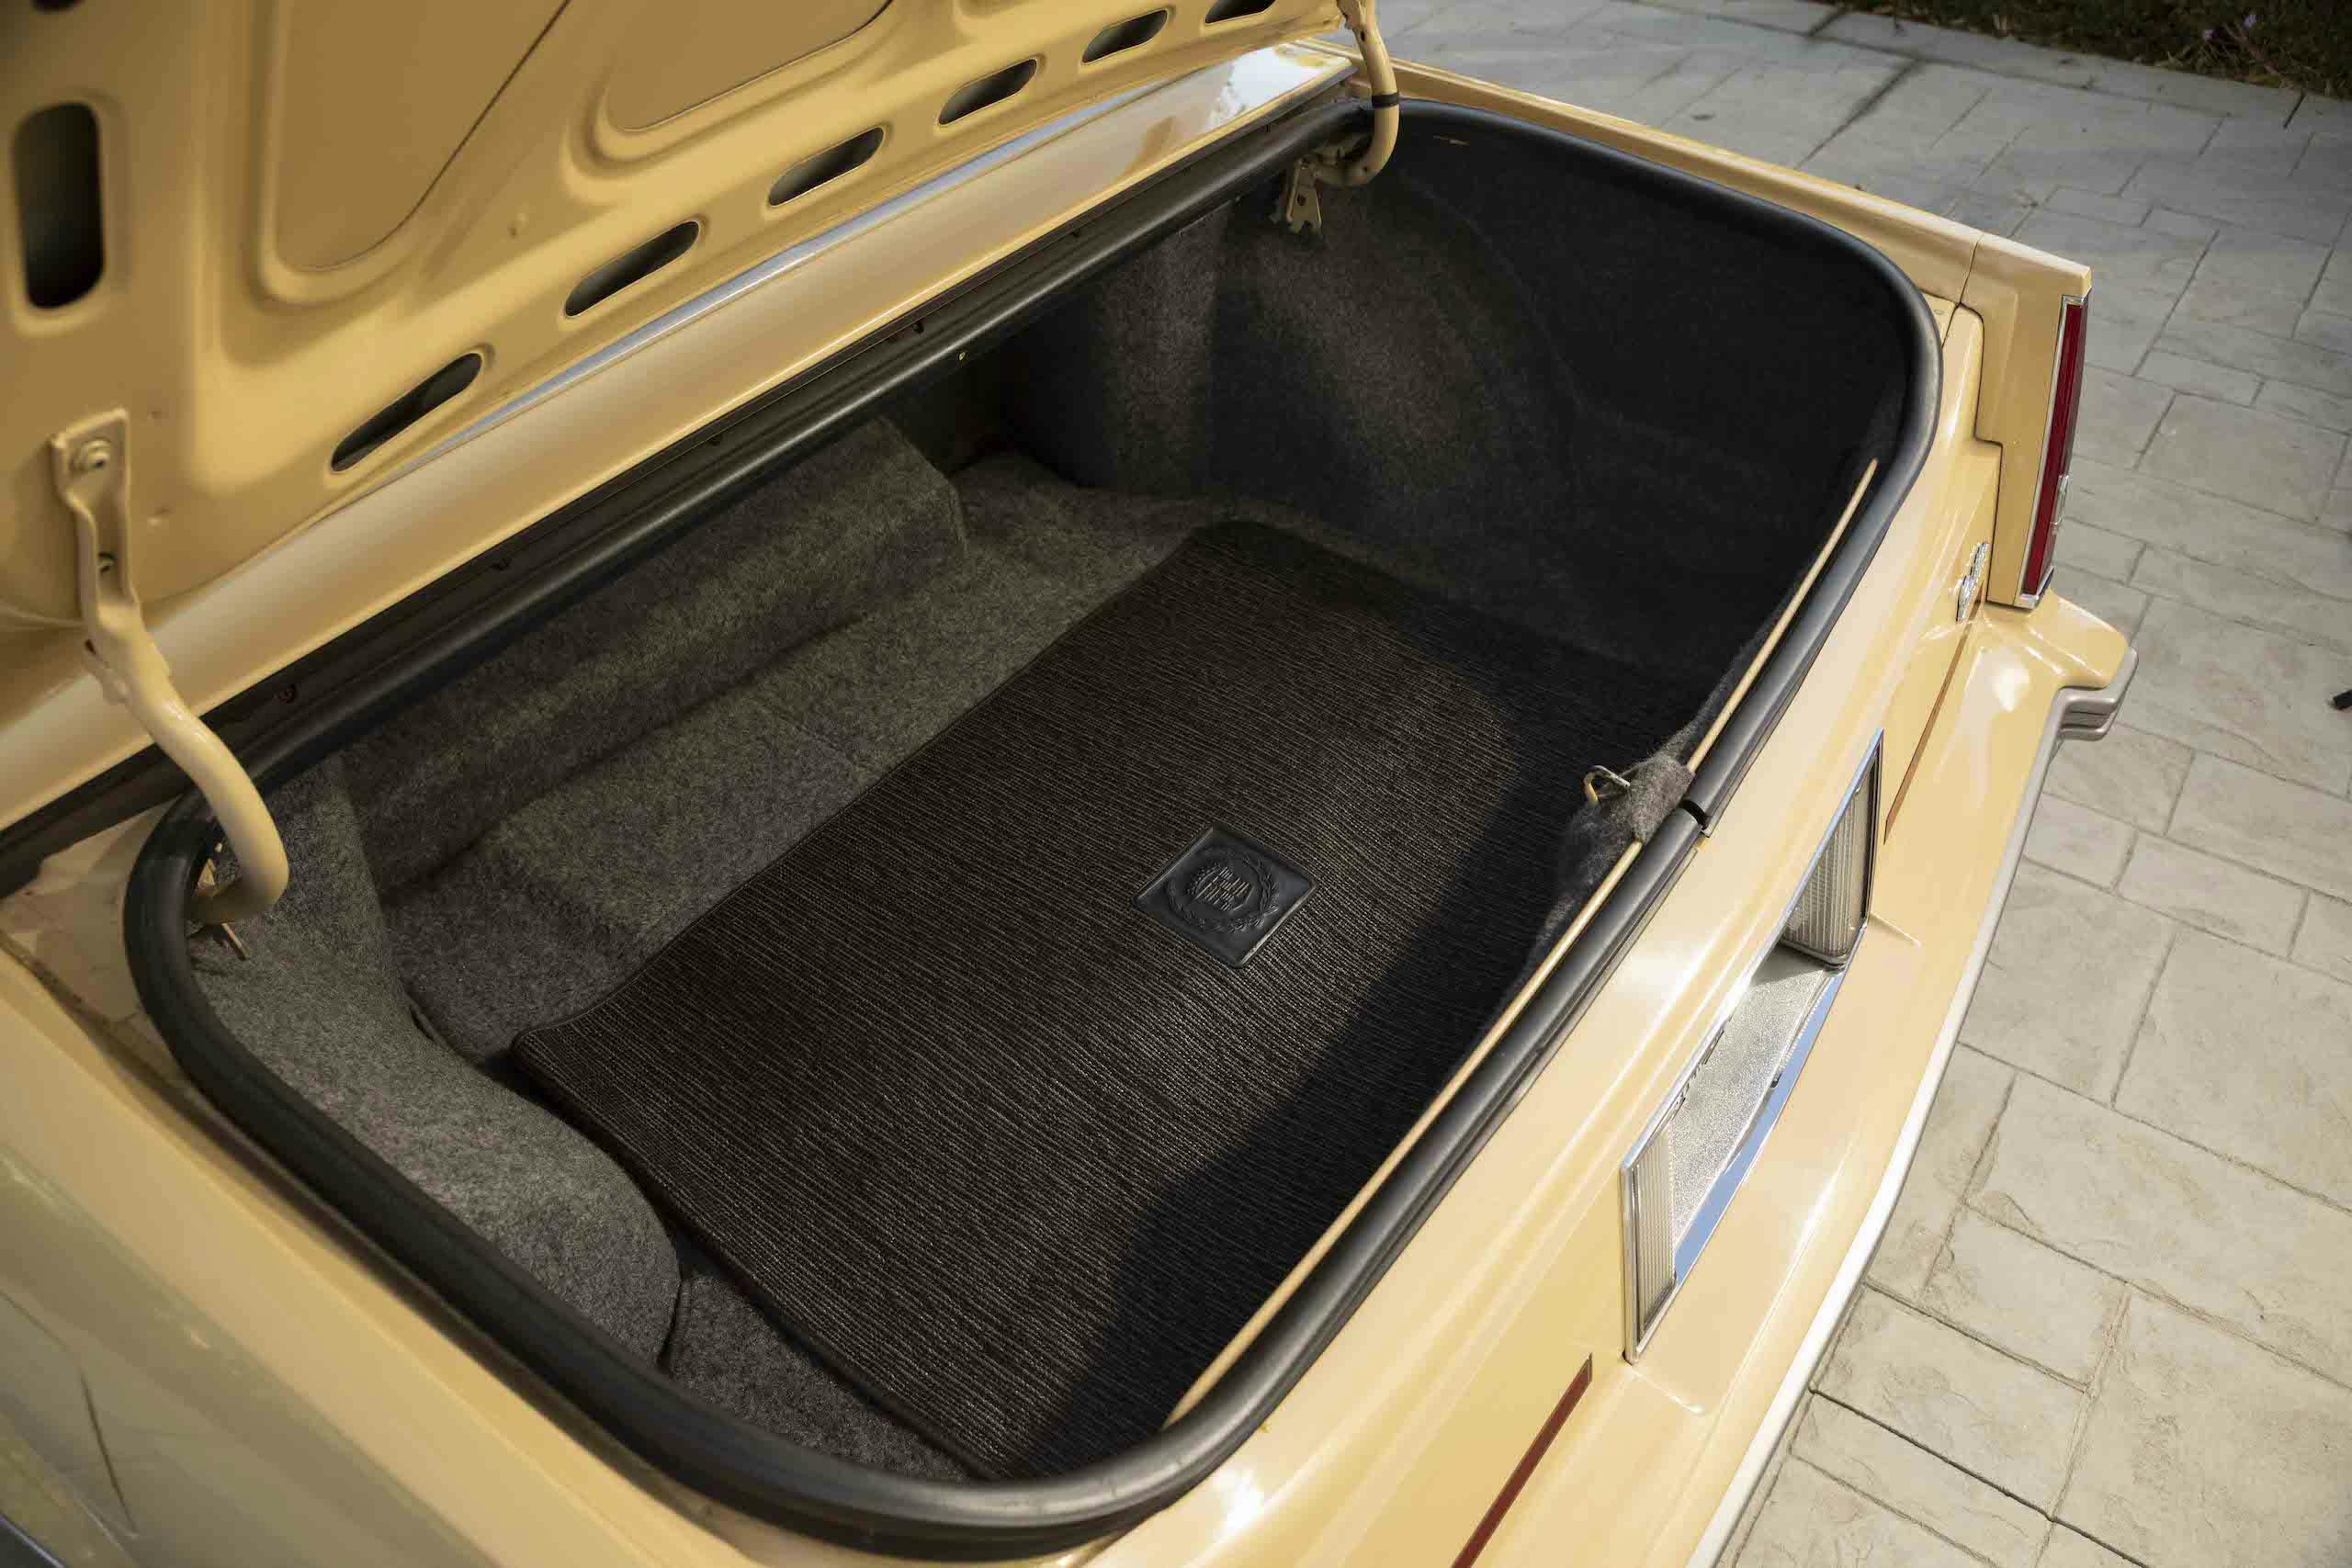 1986 Cadillac Coupe DeVille trunk